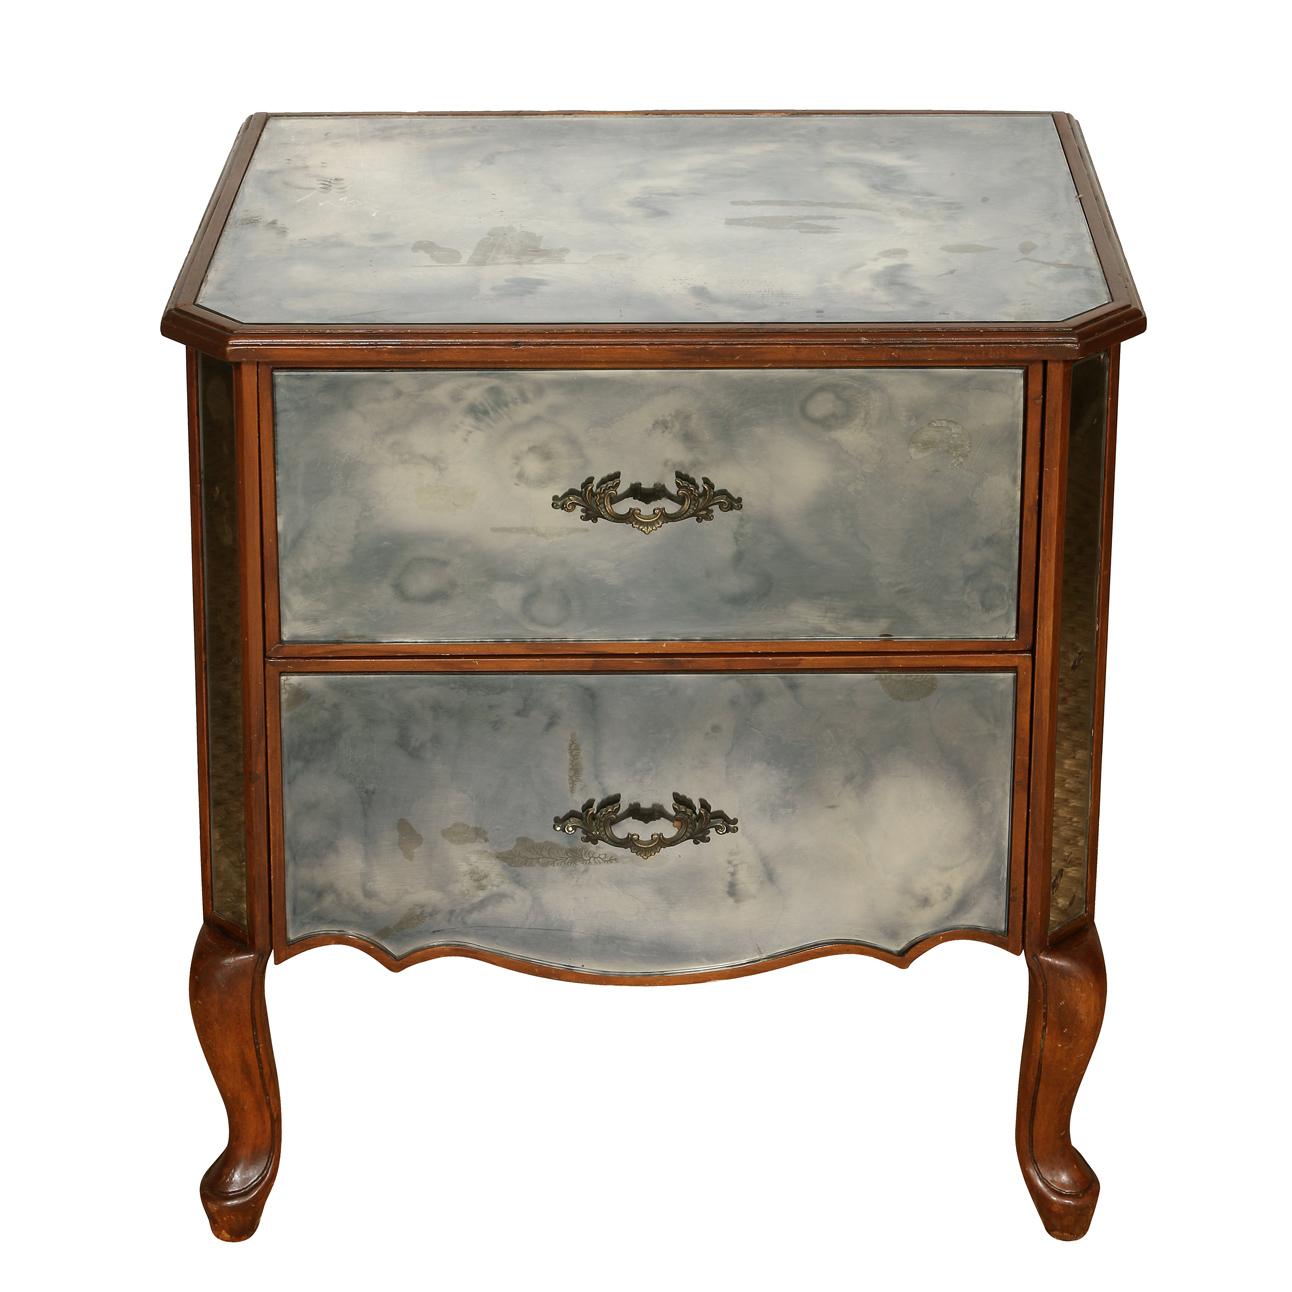 Pair of Venetian style mirrored nightstands with two drawers in neutral wood frames with cabriole legs.